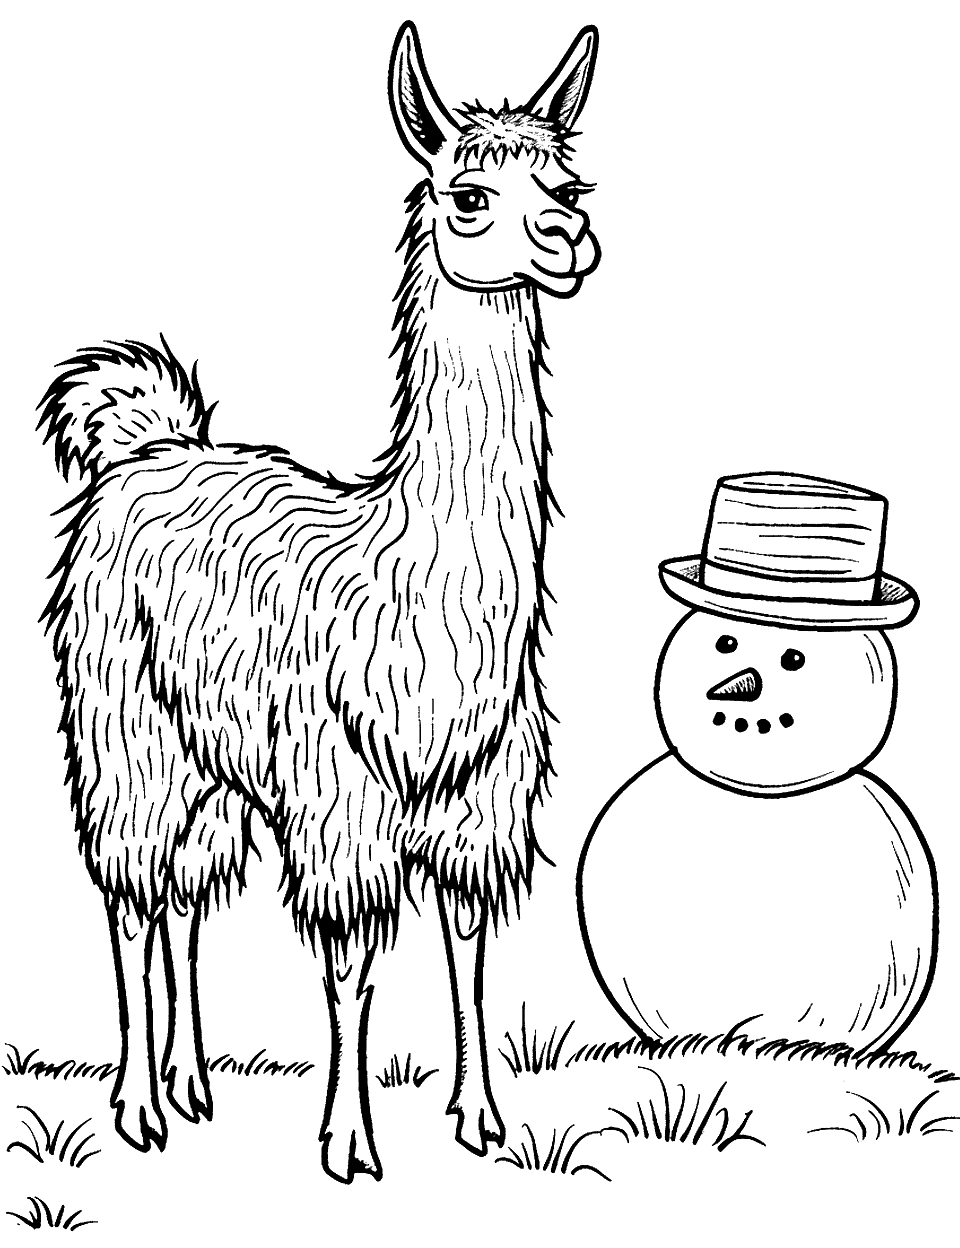 Llama and a Snowman Coloring Page - A llama standing next to a snowman during winter.